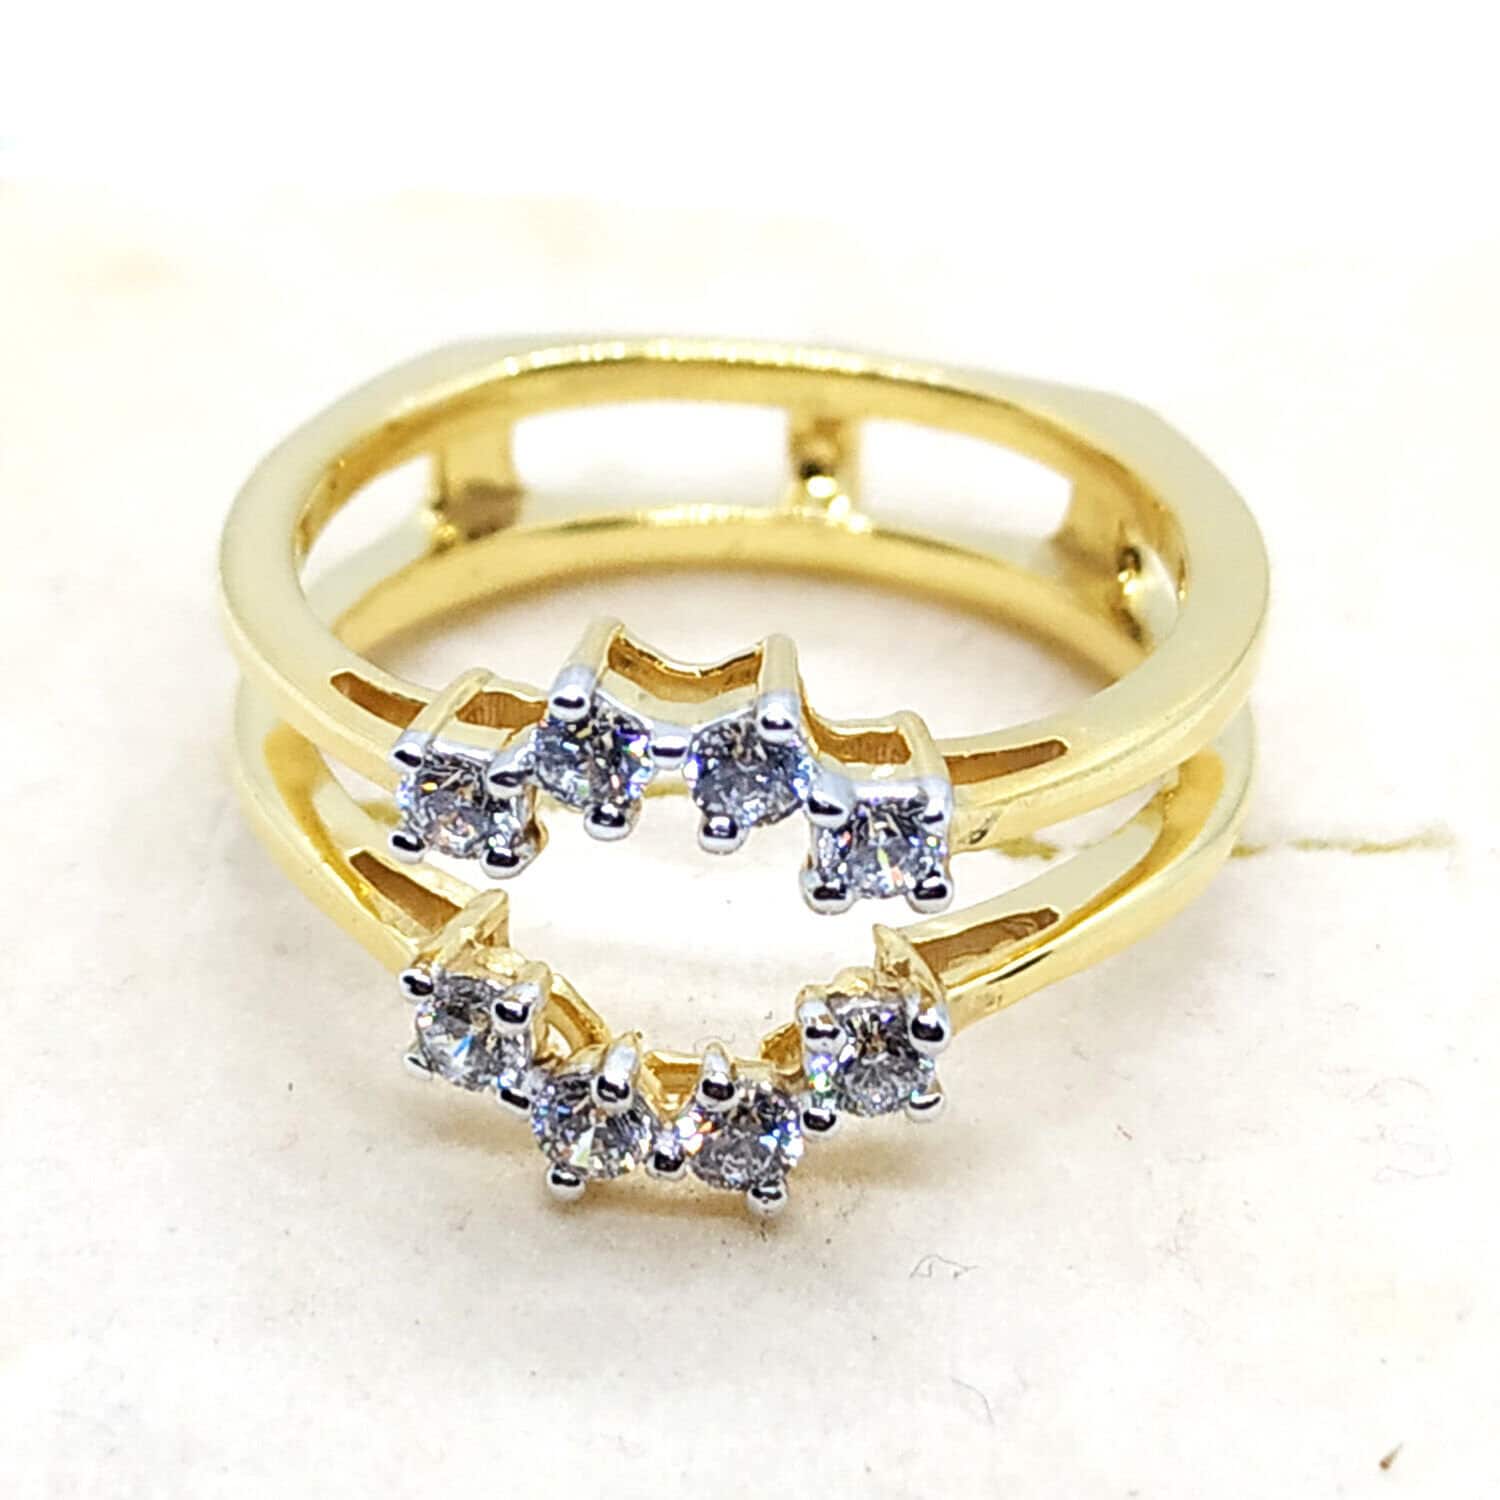 1/4ctw Diamond Floral Yellow Gold Ring Guard | REEDS Jewelers